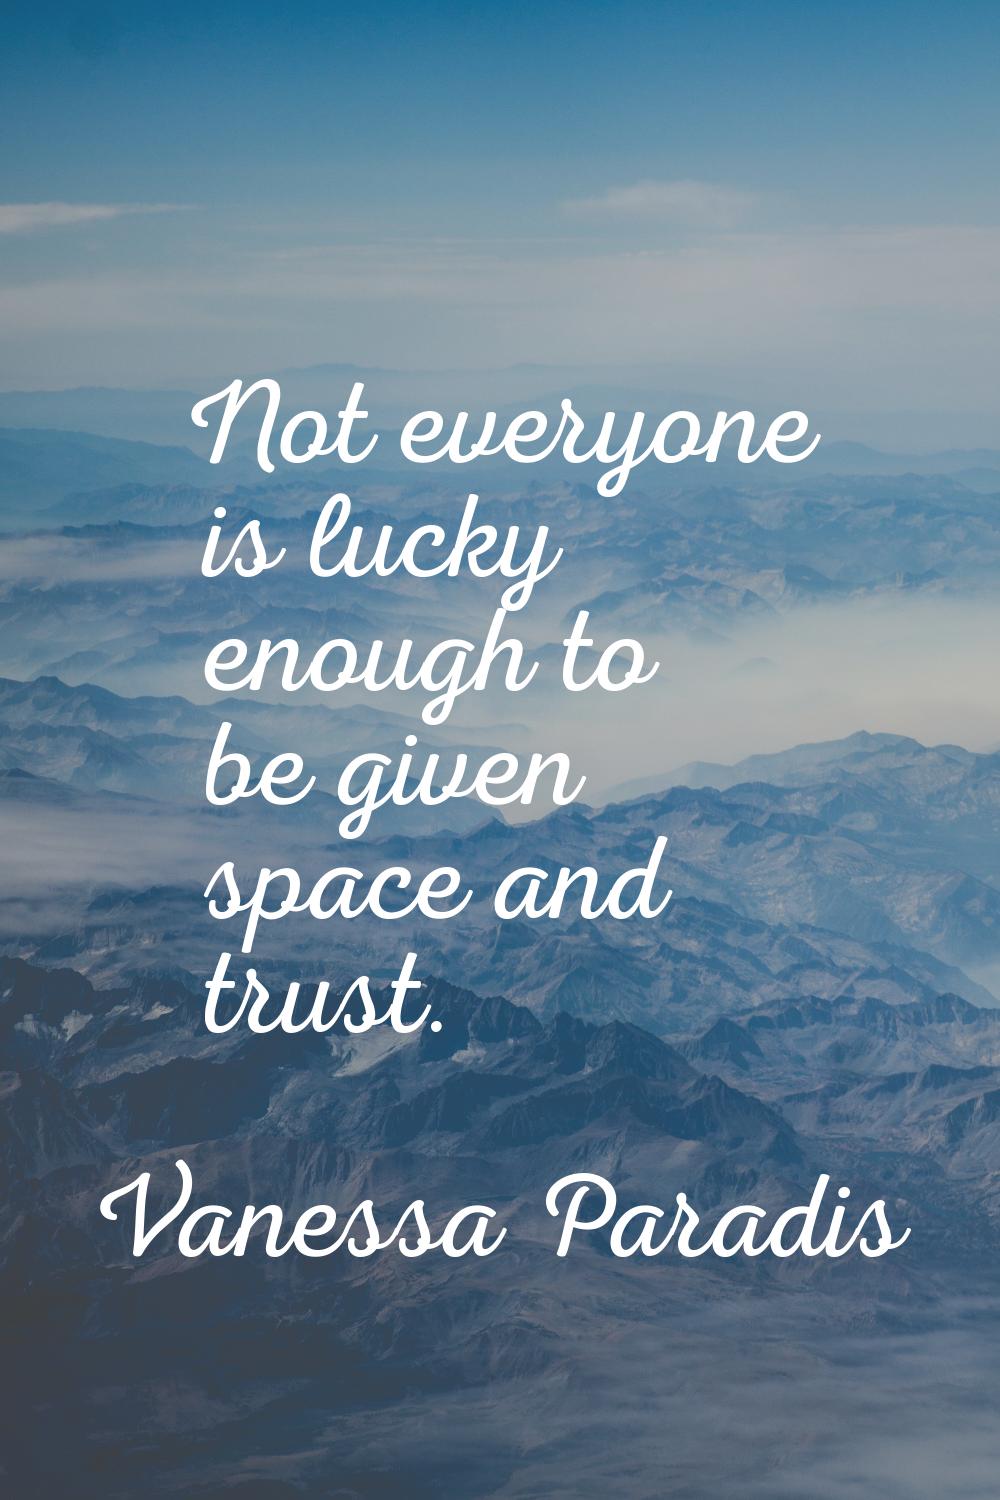 Not everyone is lucky enough to be given space and trust.